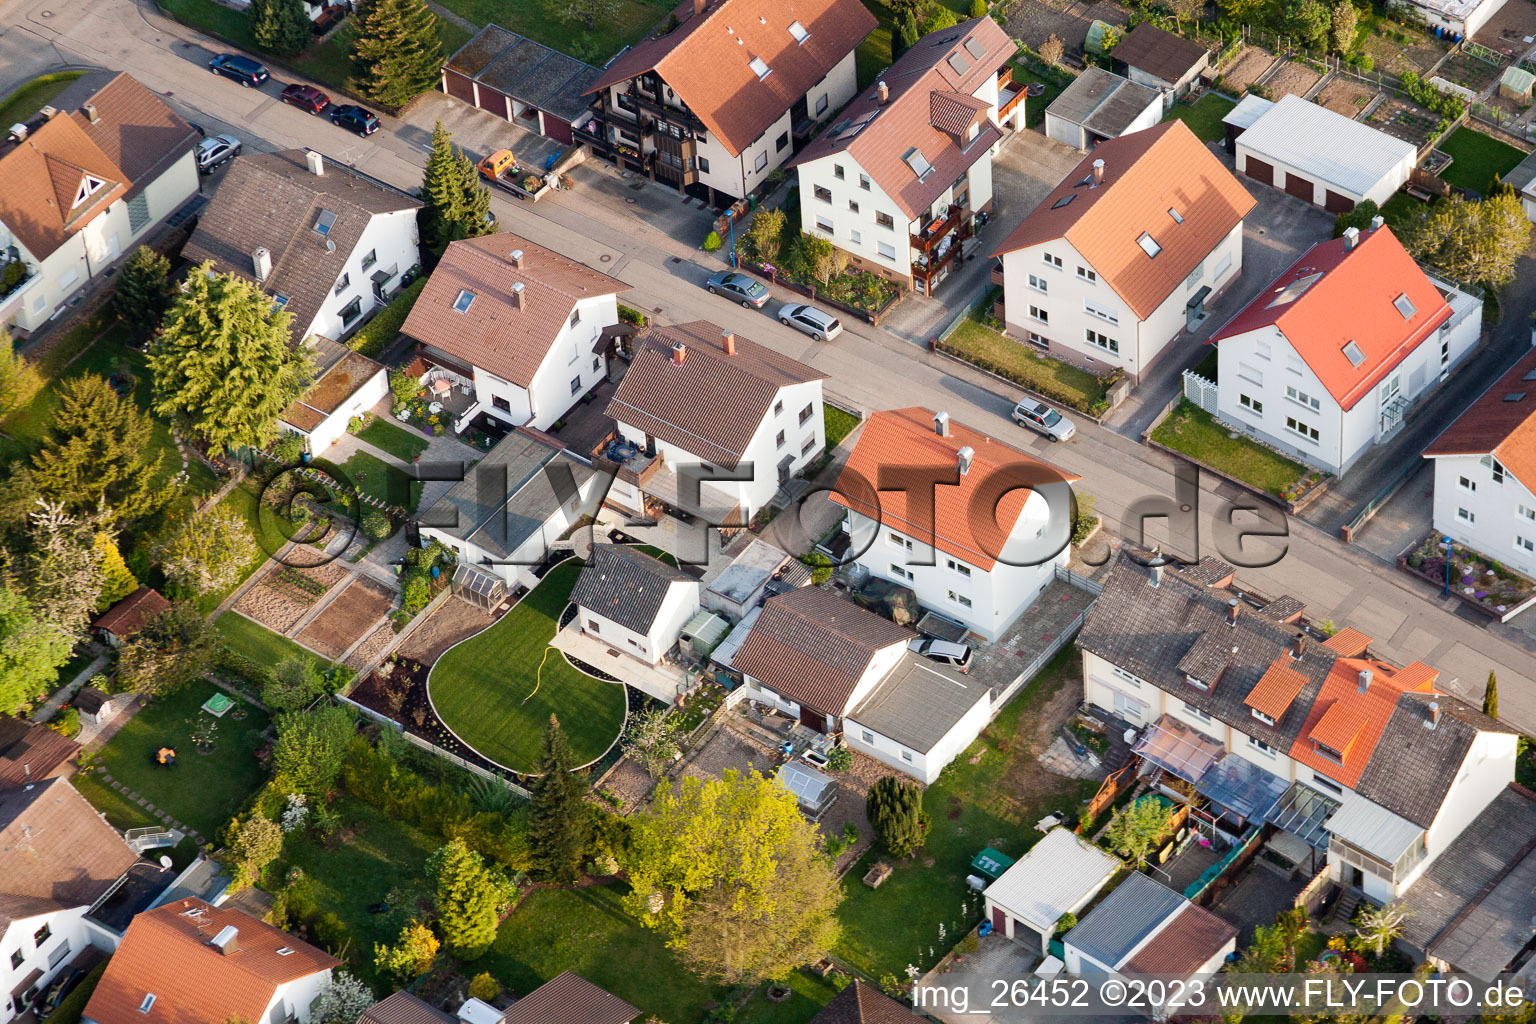 Oblique view of Home gardens on Rosenstr in the district Reichenbach in Waldbronn in the state Baden-Wuerttemberg, Germany